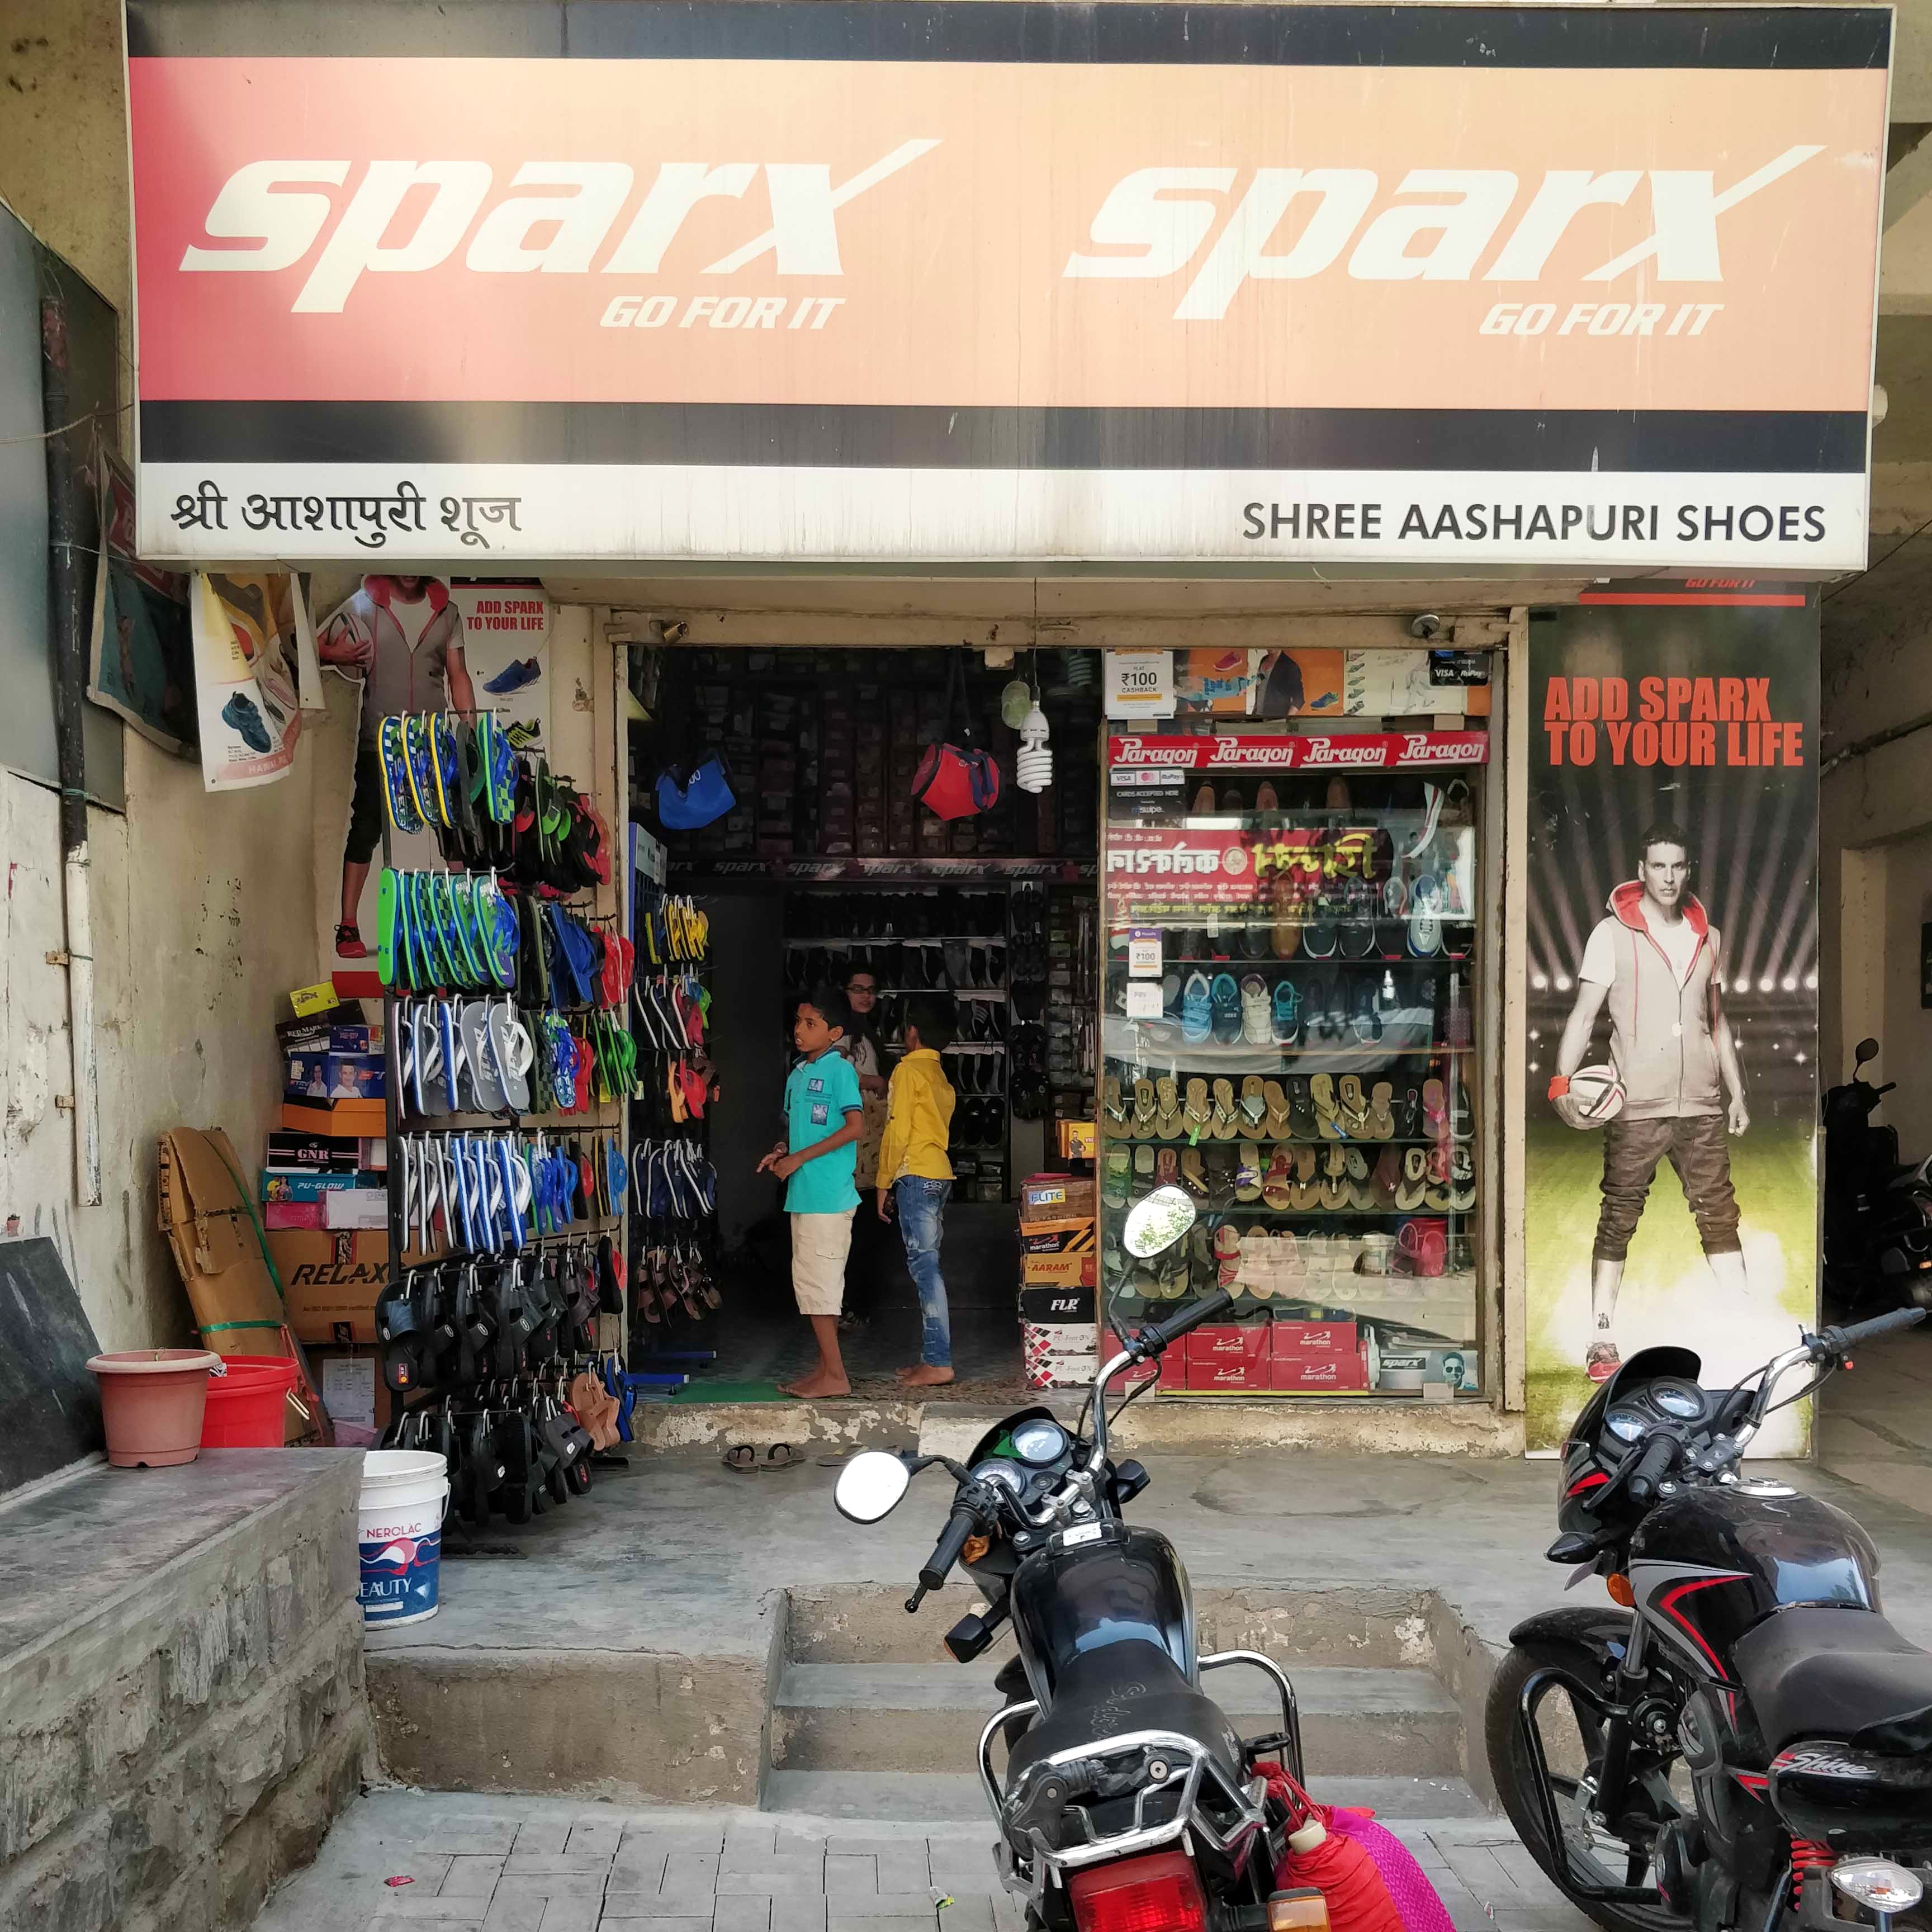 Building,Vehicle,Motorcycle accessories,Outlet store,Retail,Footwear,Motorcycle,Auto part,Convenience store,Shoe